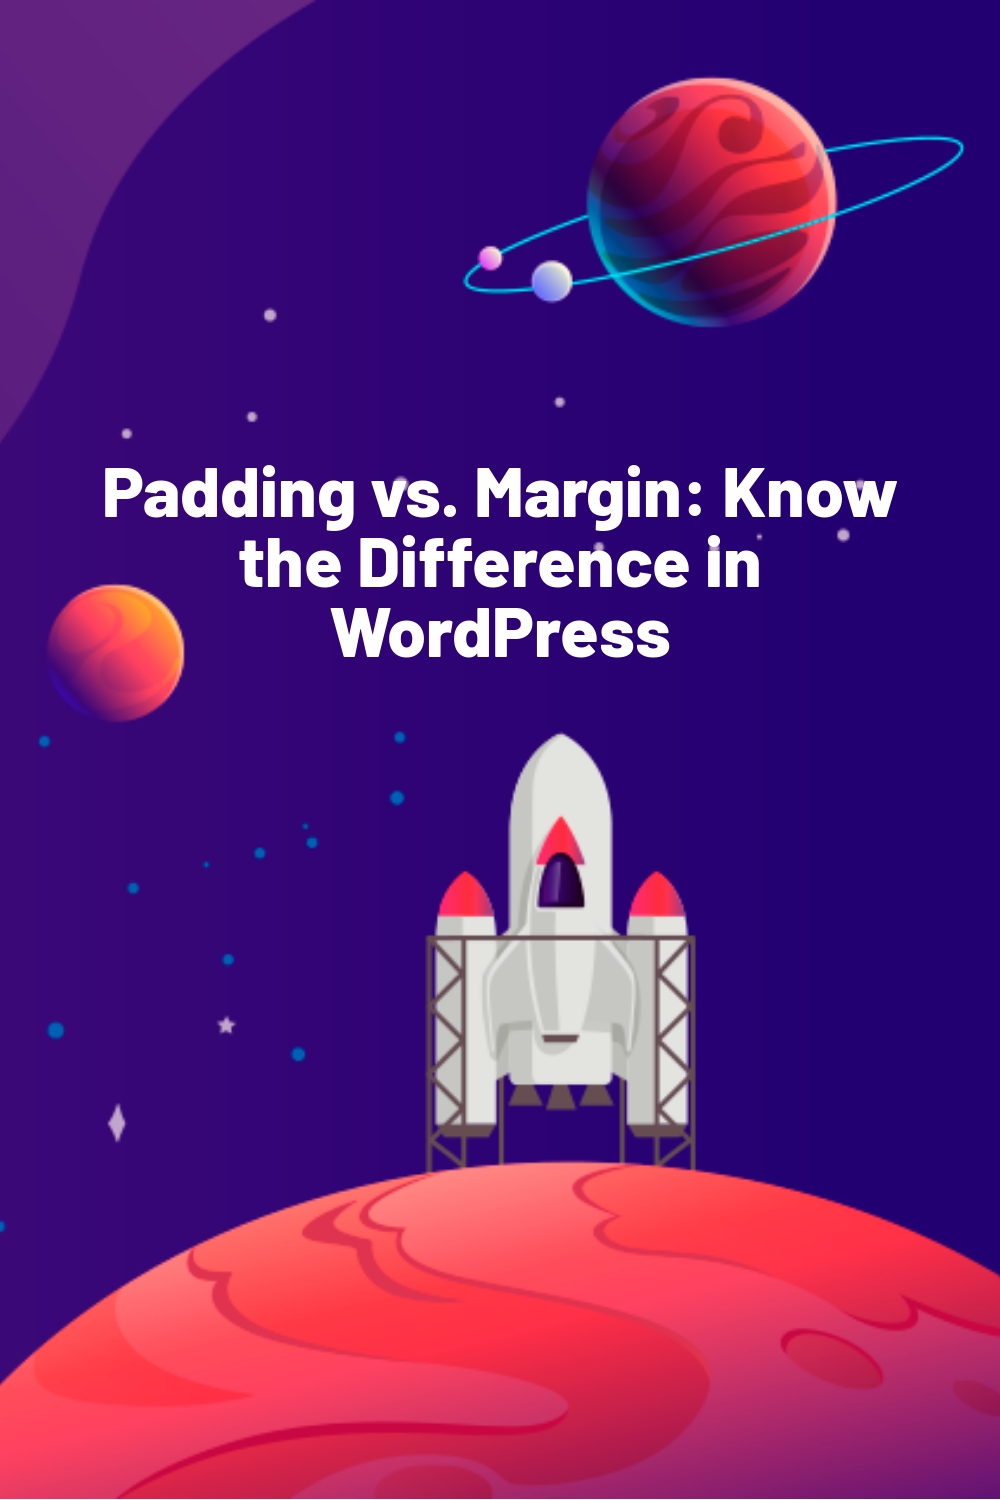 Padding vs. Margin: Know the Difference in WordPress